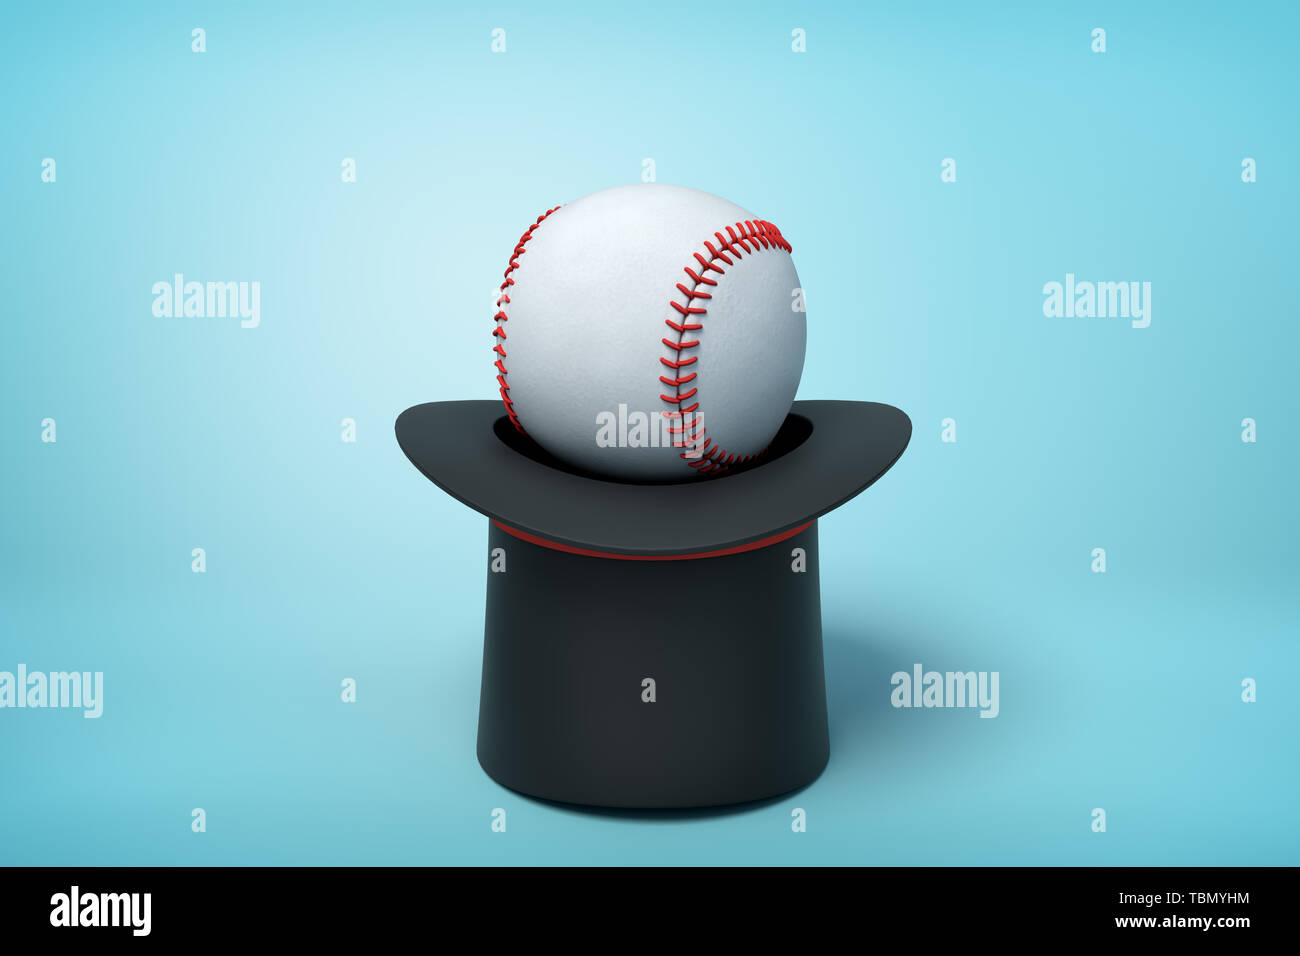 3d rendering of black tophat upside down with white baseball inside on light blue background. Stock Photo